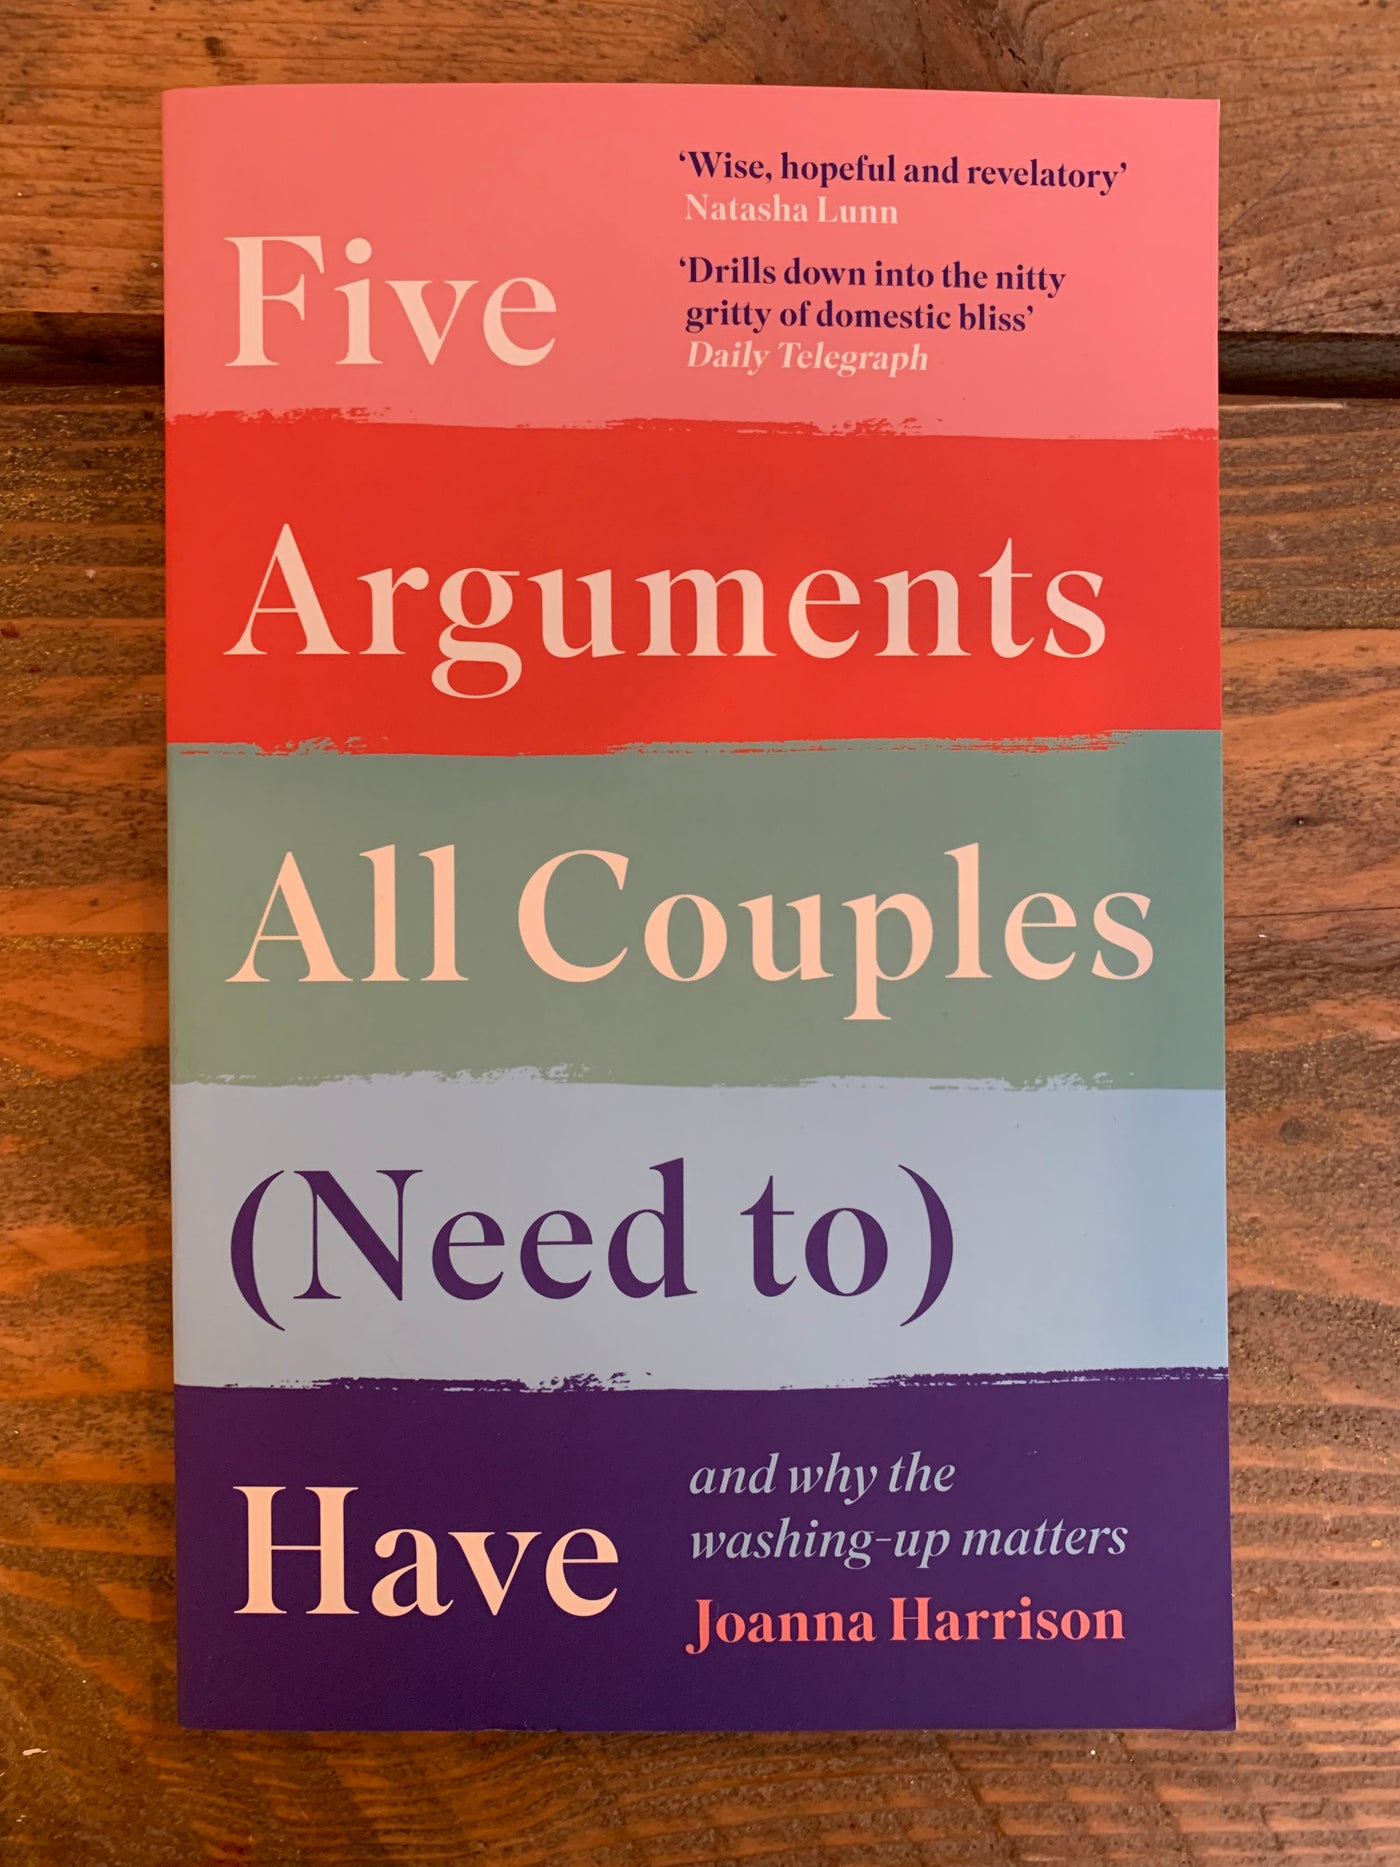 Five Arguments All Couples (Need to) Have